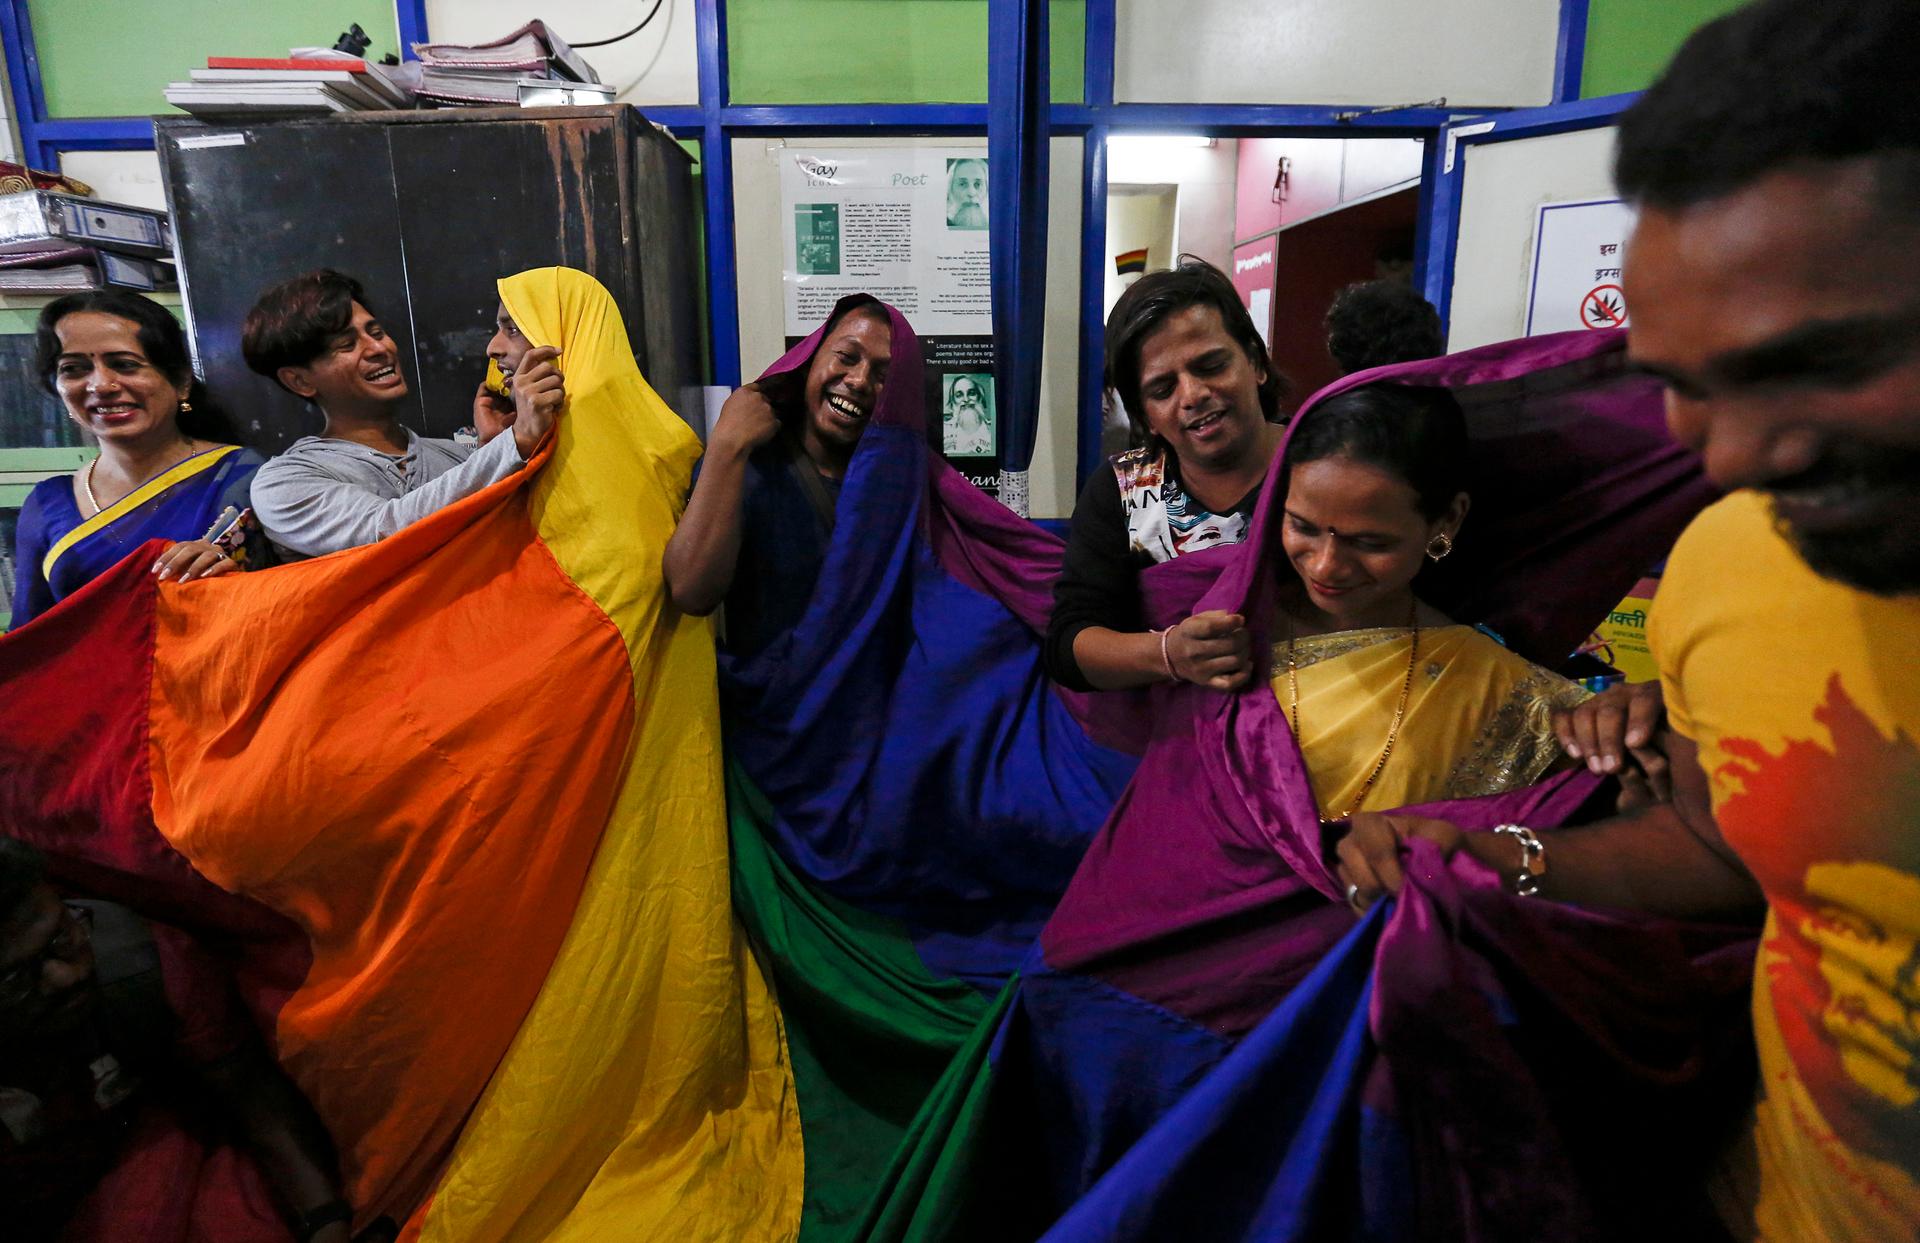 Gay rights activists in India celebrate and cover themselves in rainbow flags.